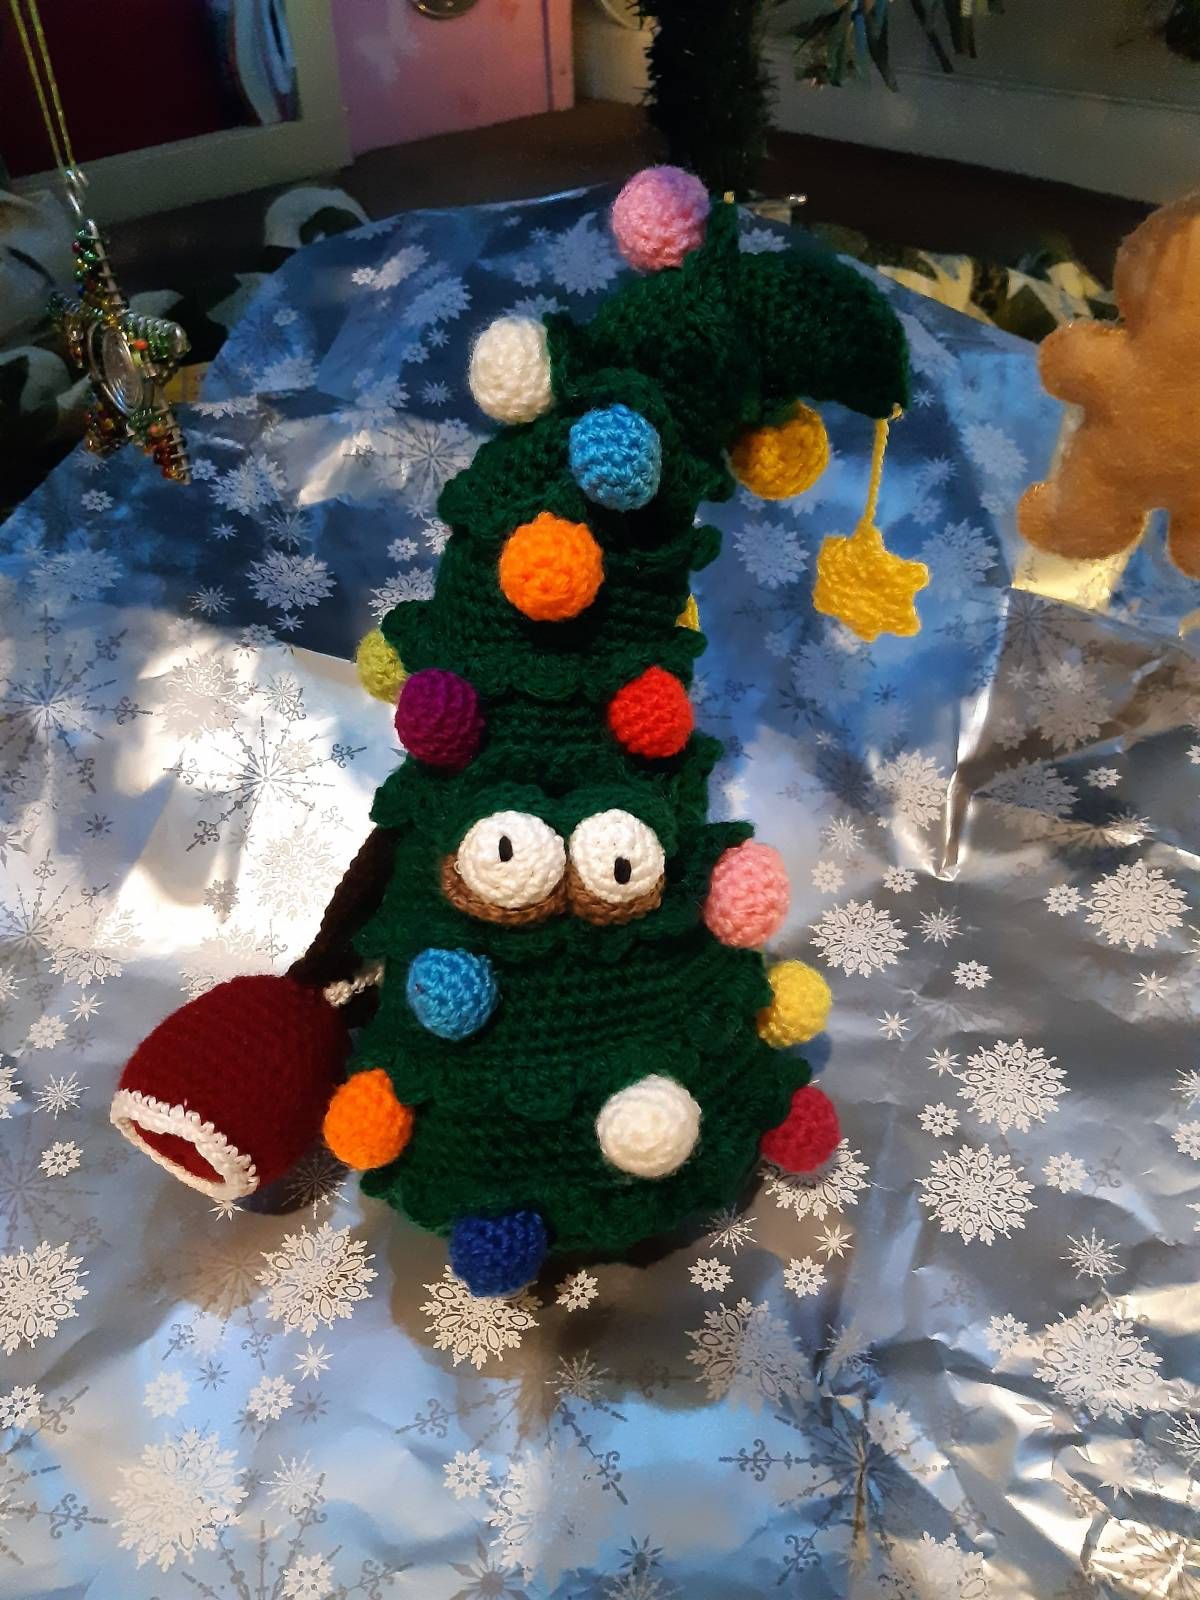 Christmas Tree Crochet Amigurumi Pattern Review by Nuala McCarthy for Cottontail and Whiskers